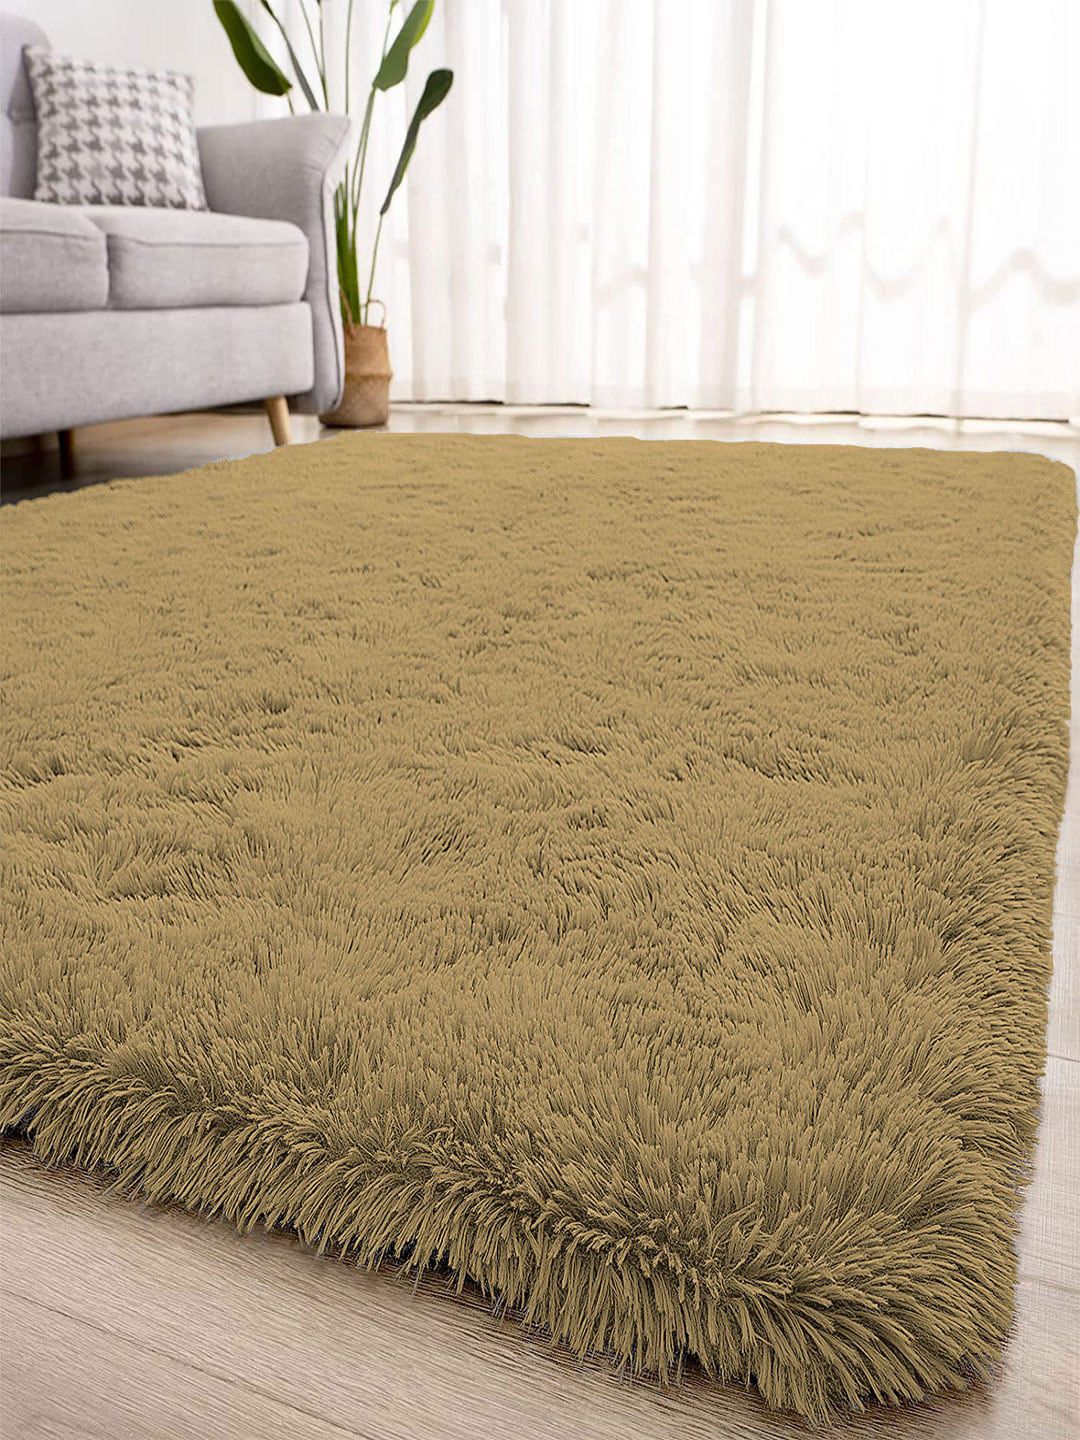 LUXEHOME INTERNATIONAL Golden-Colored 2000 GSM Anti-Skid Floor Runners Price in India